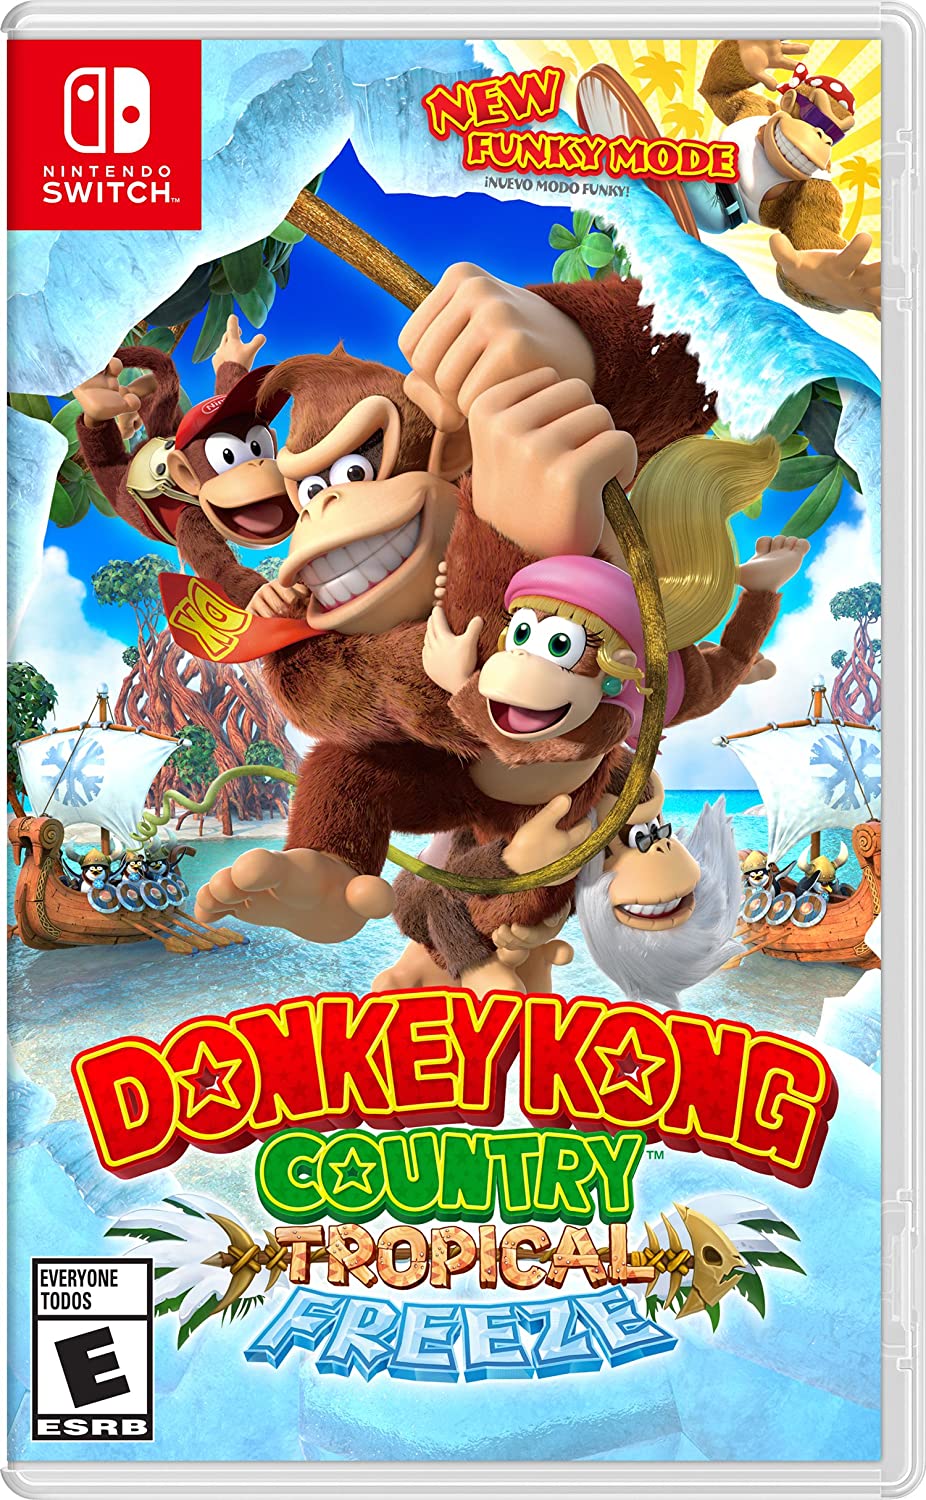 Donkey Kong Country Tropical Freeze for Nintendo Switch.